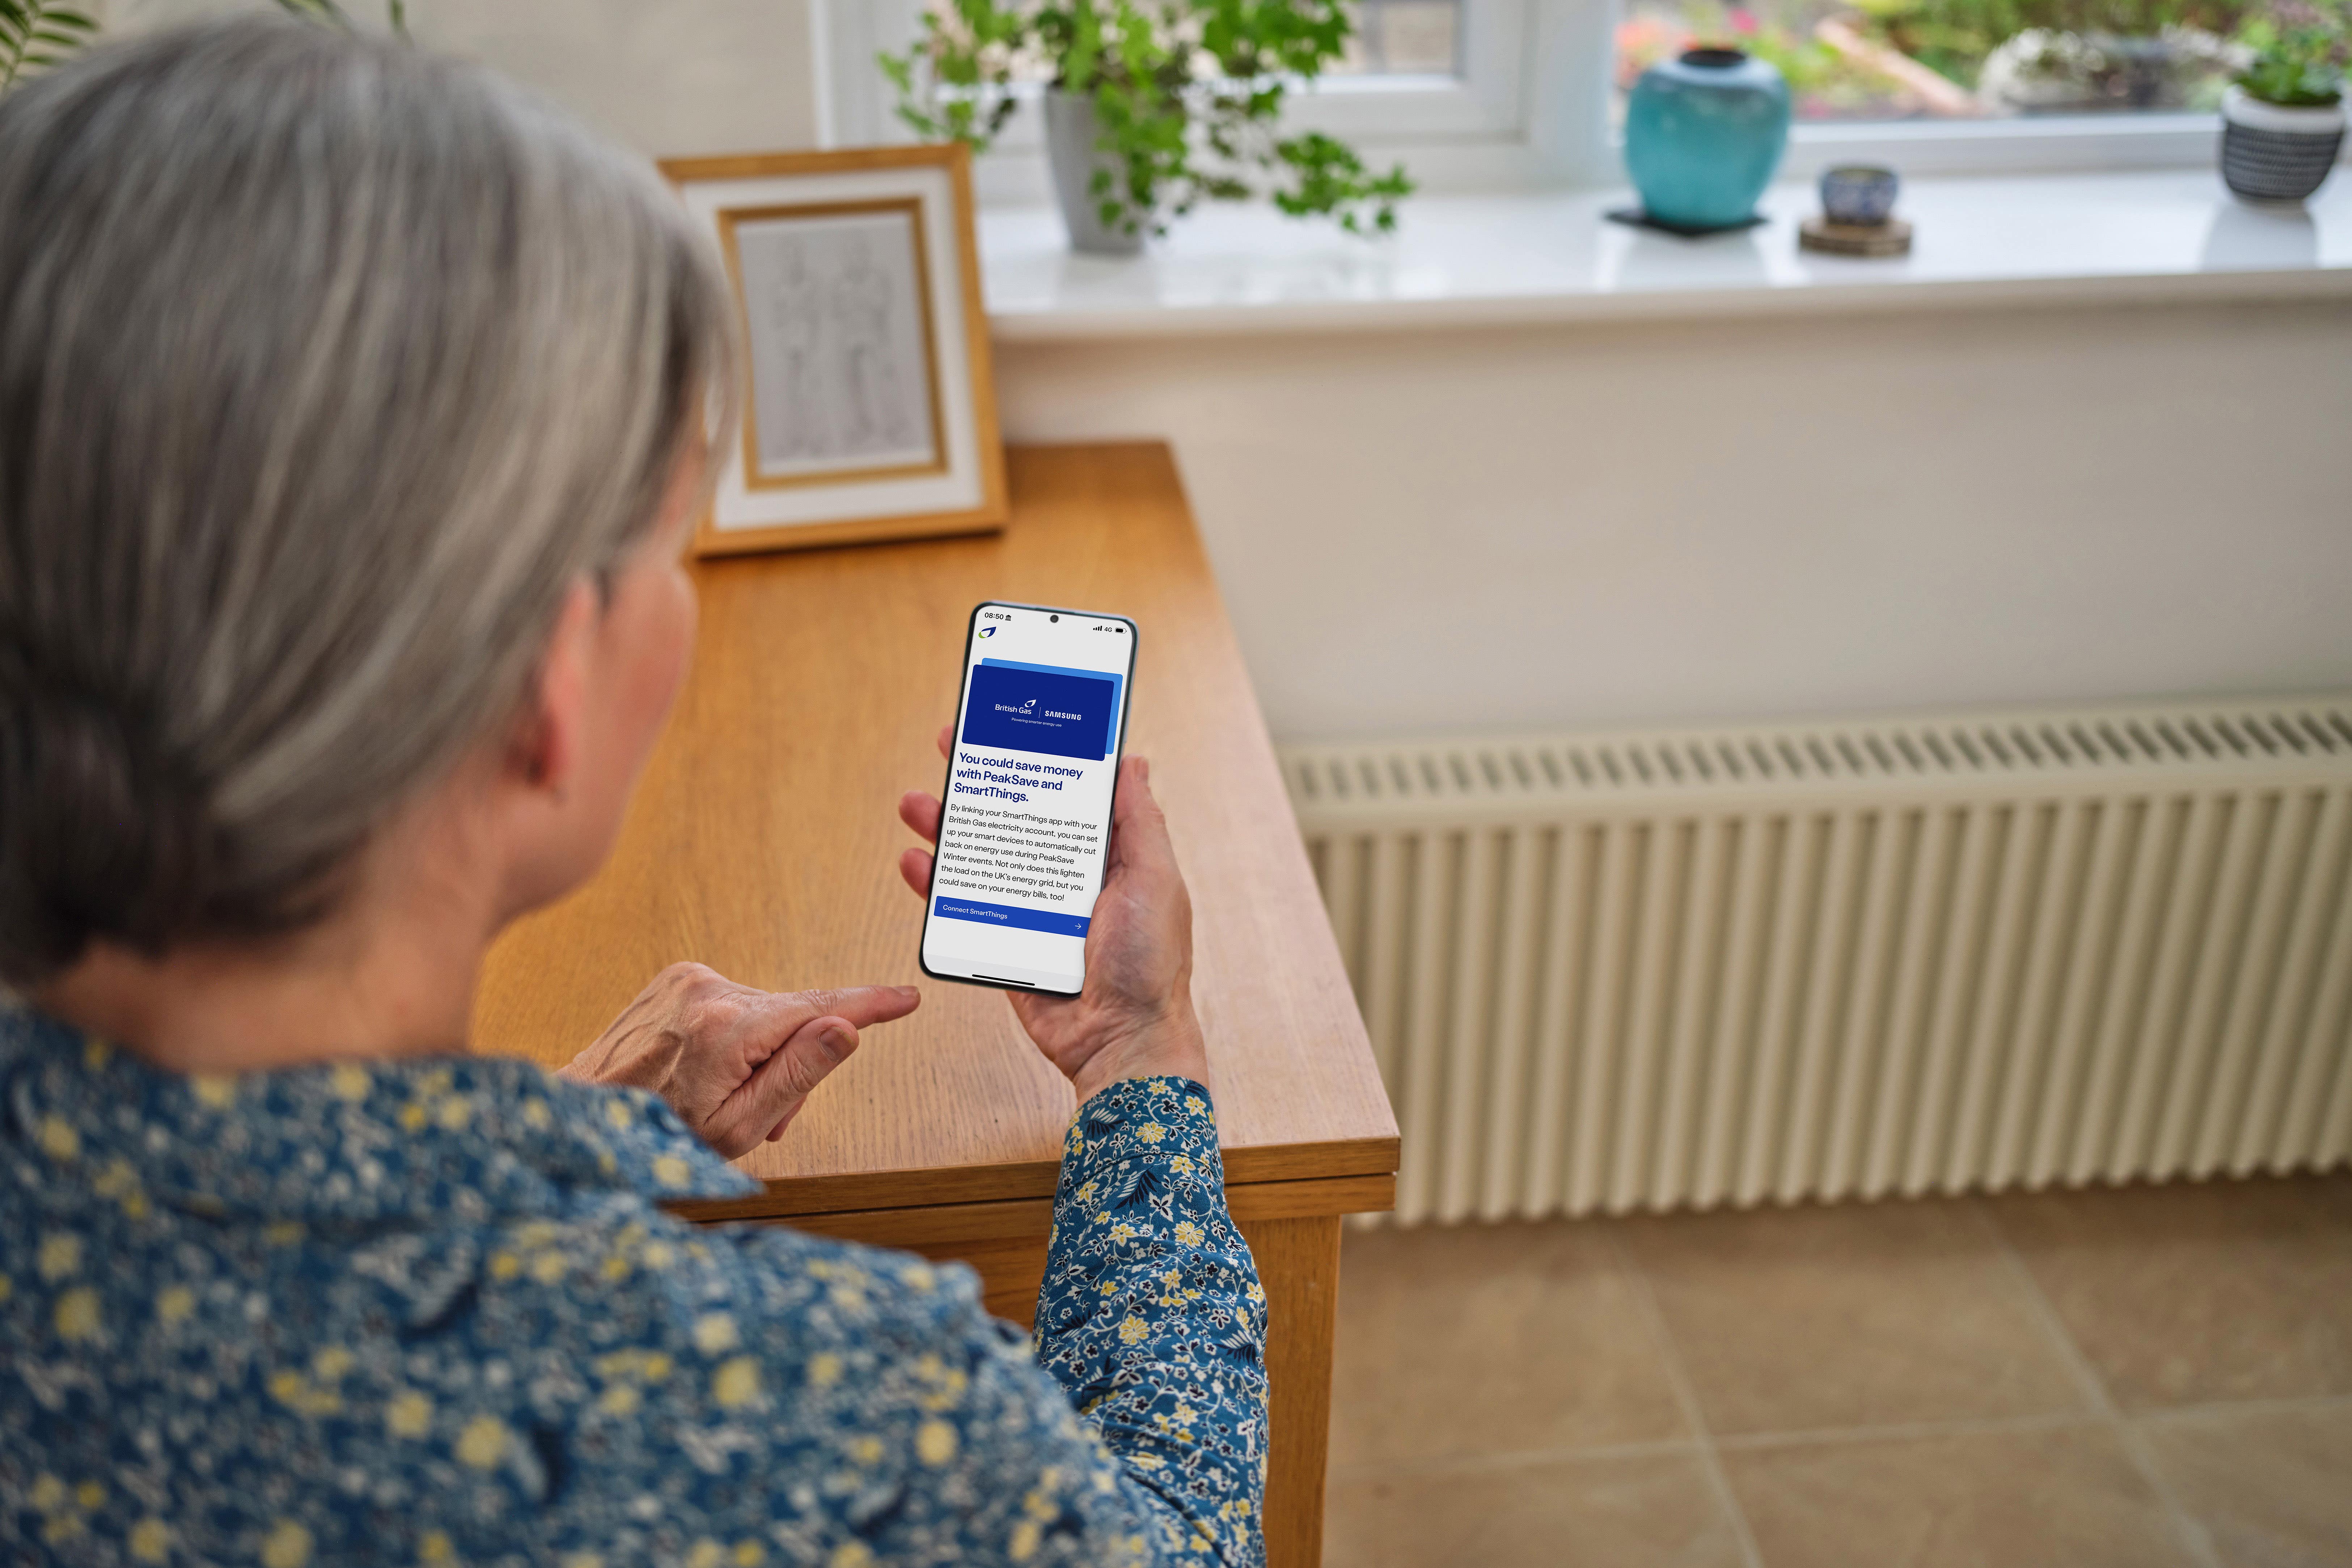 British Gas services are to be integrated into Samsung’s SmartThings app as part of a new scheme between the two companies to boost consumer energy saving (Samsung/British Gas/PA)